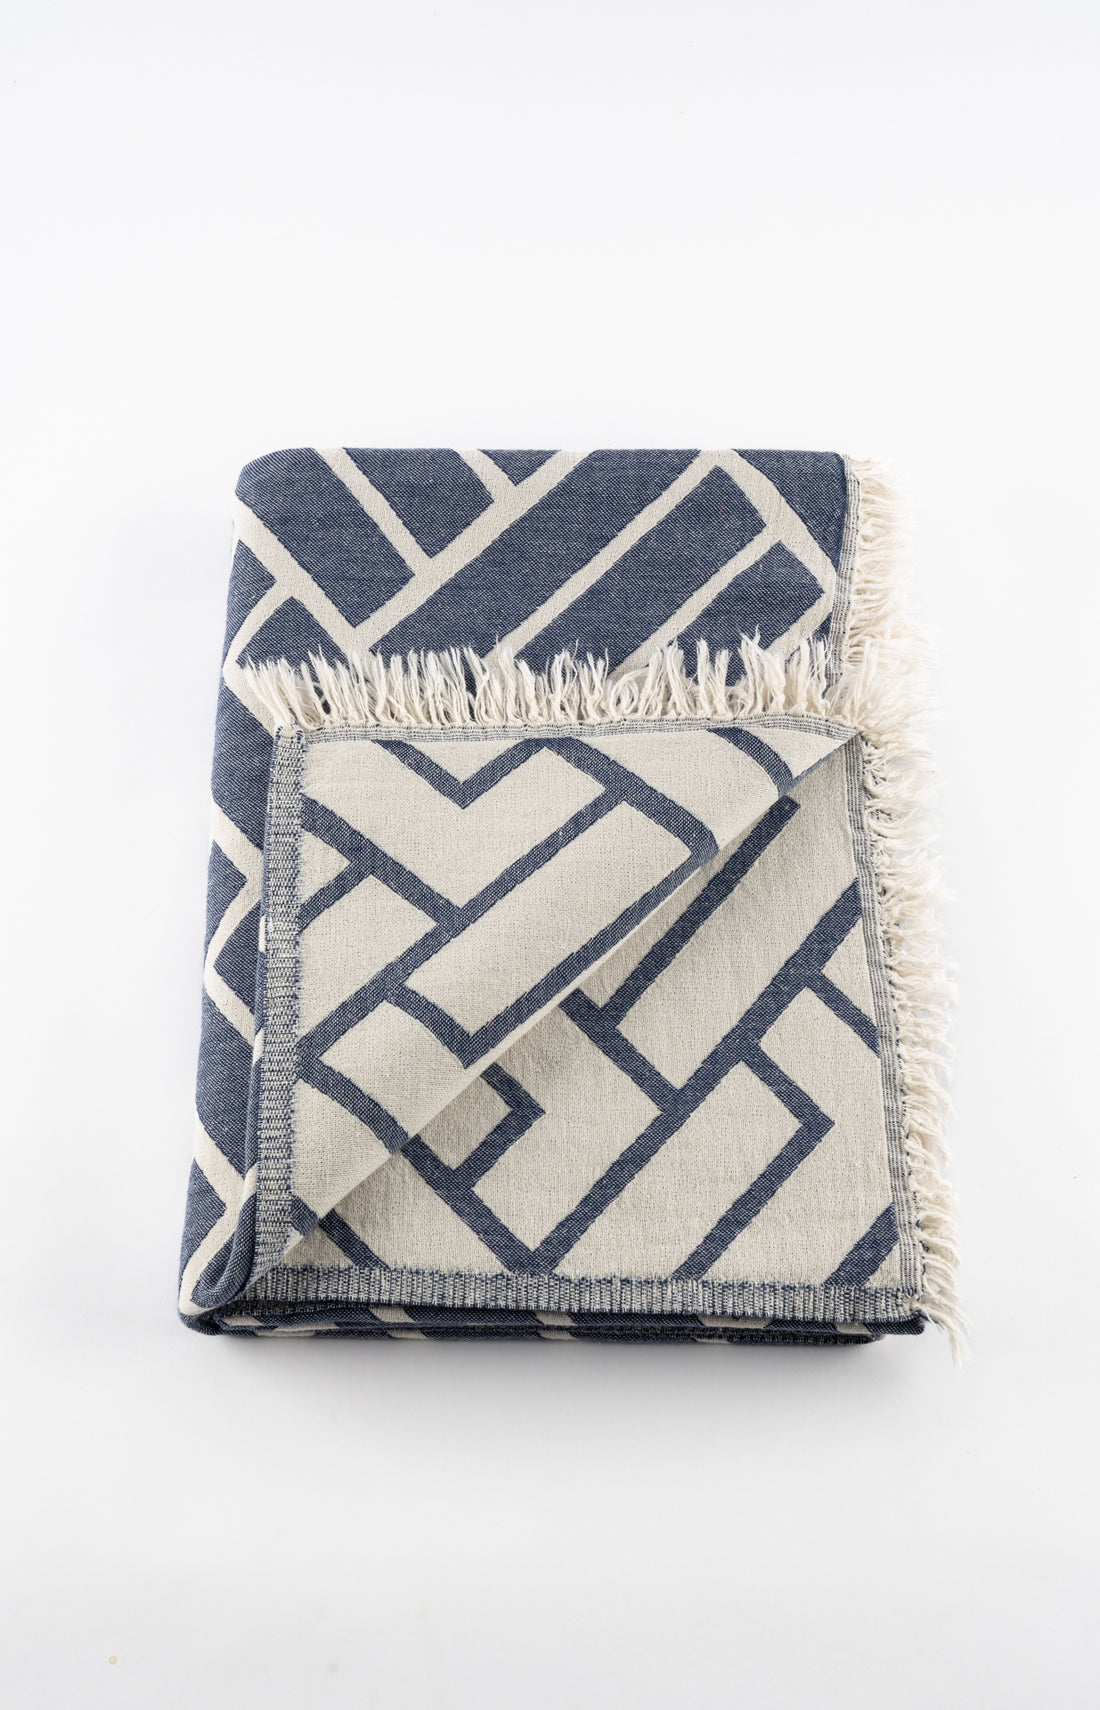 Sauna Blanket Geo-Pattern Collection, 3 colors